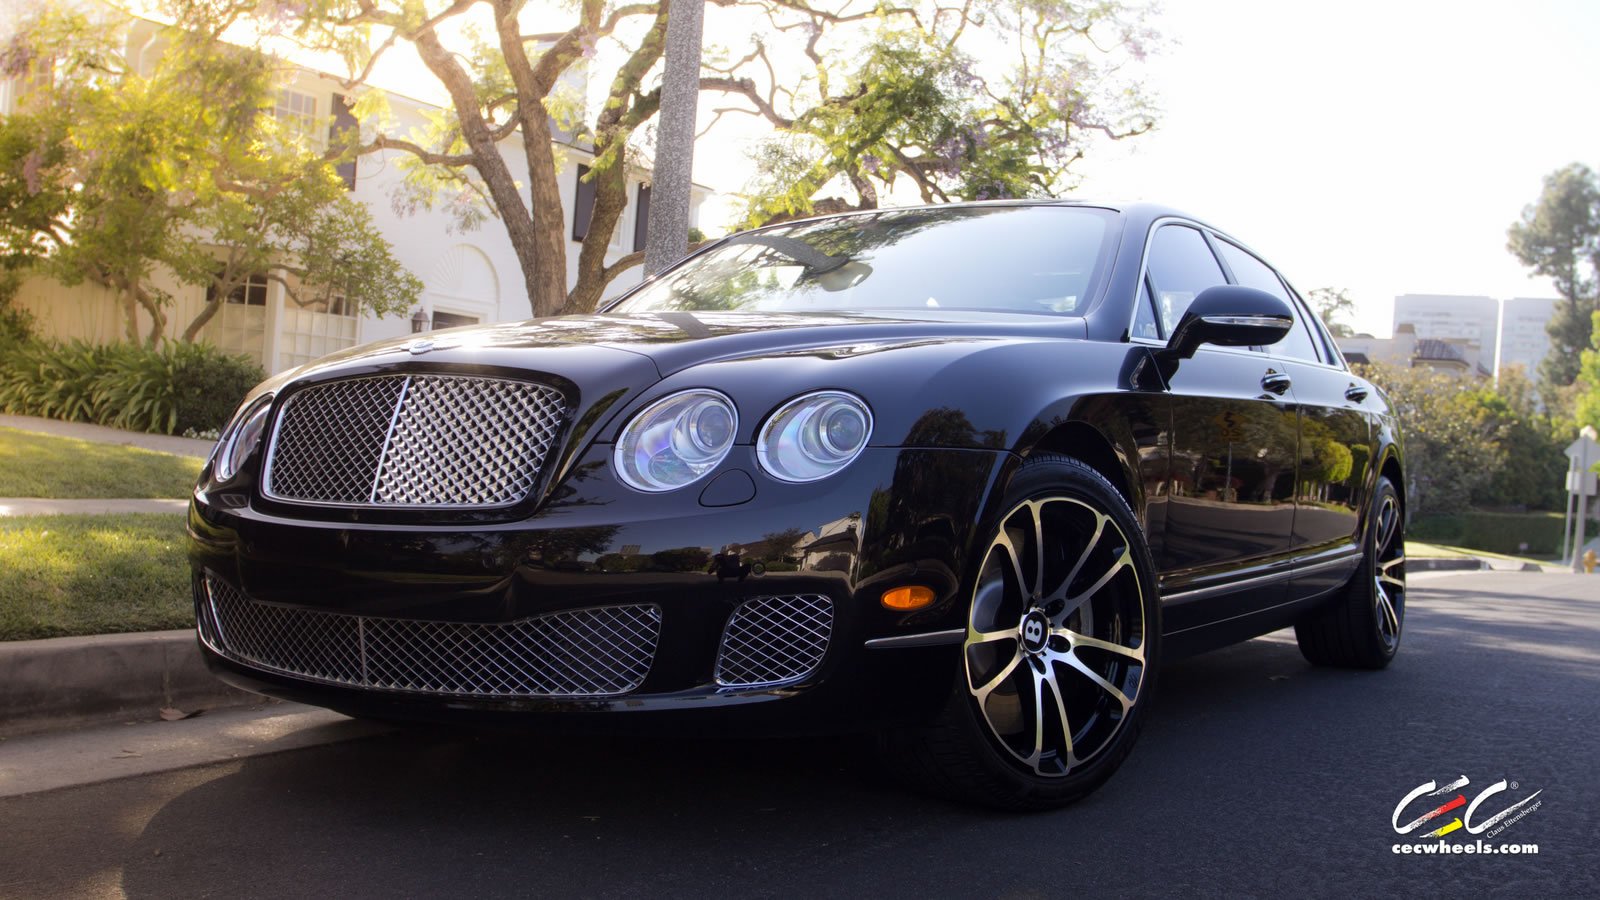 2015, Cars, Cec, Tuning, Wheels, Bentley, Continental, Flying, Spur Wallpaper